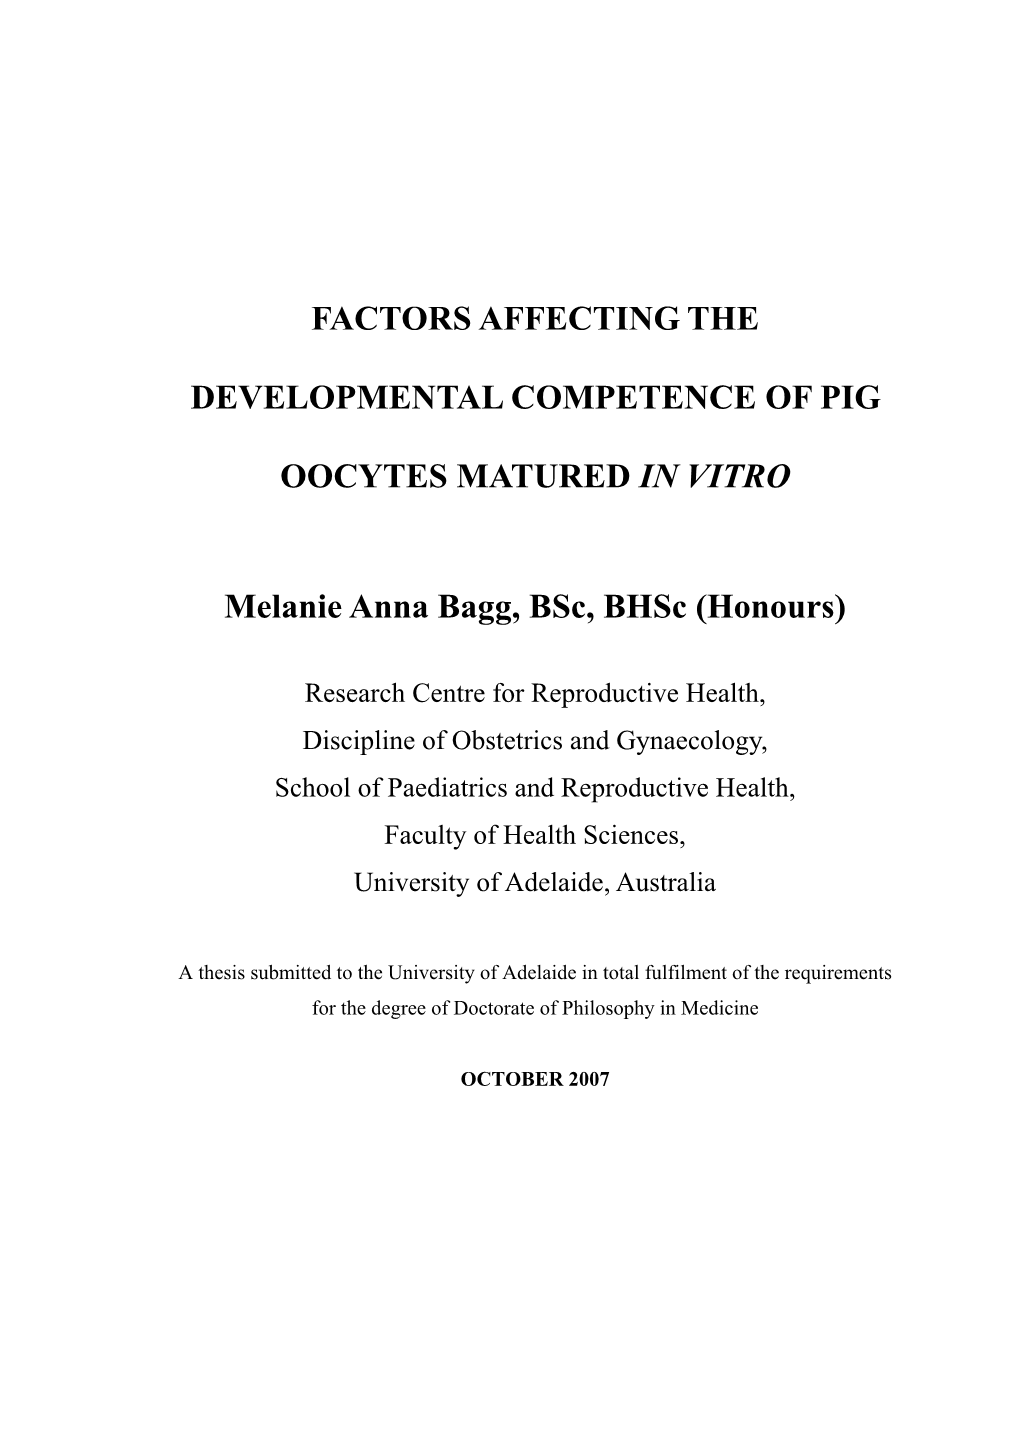 Factors Affecting the Developmental Competence